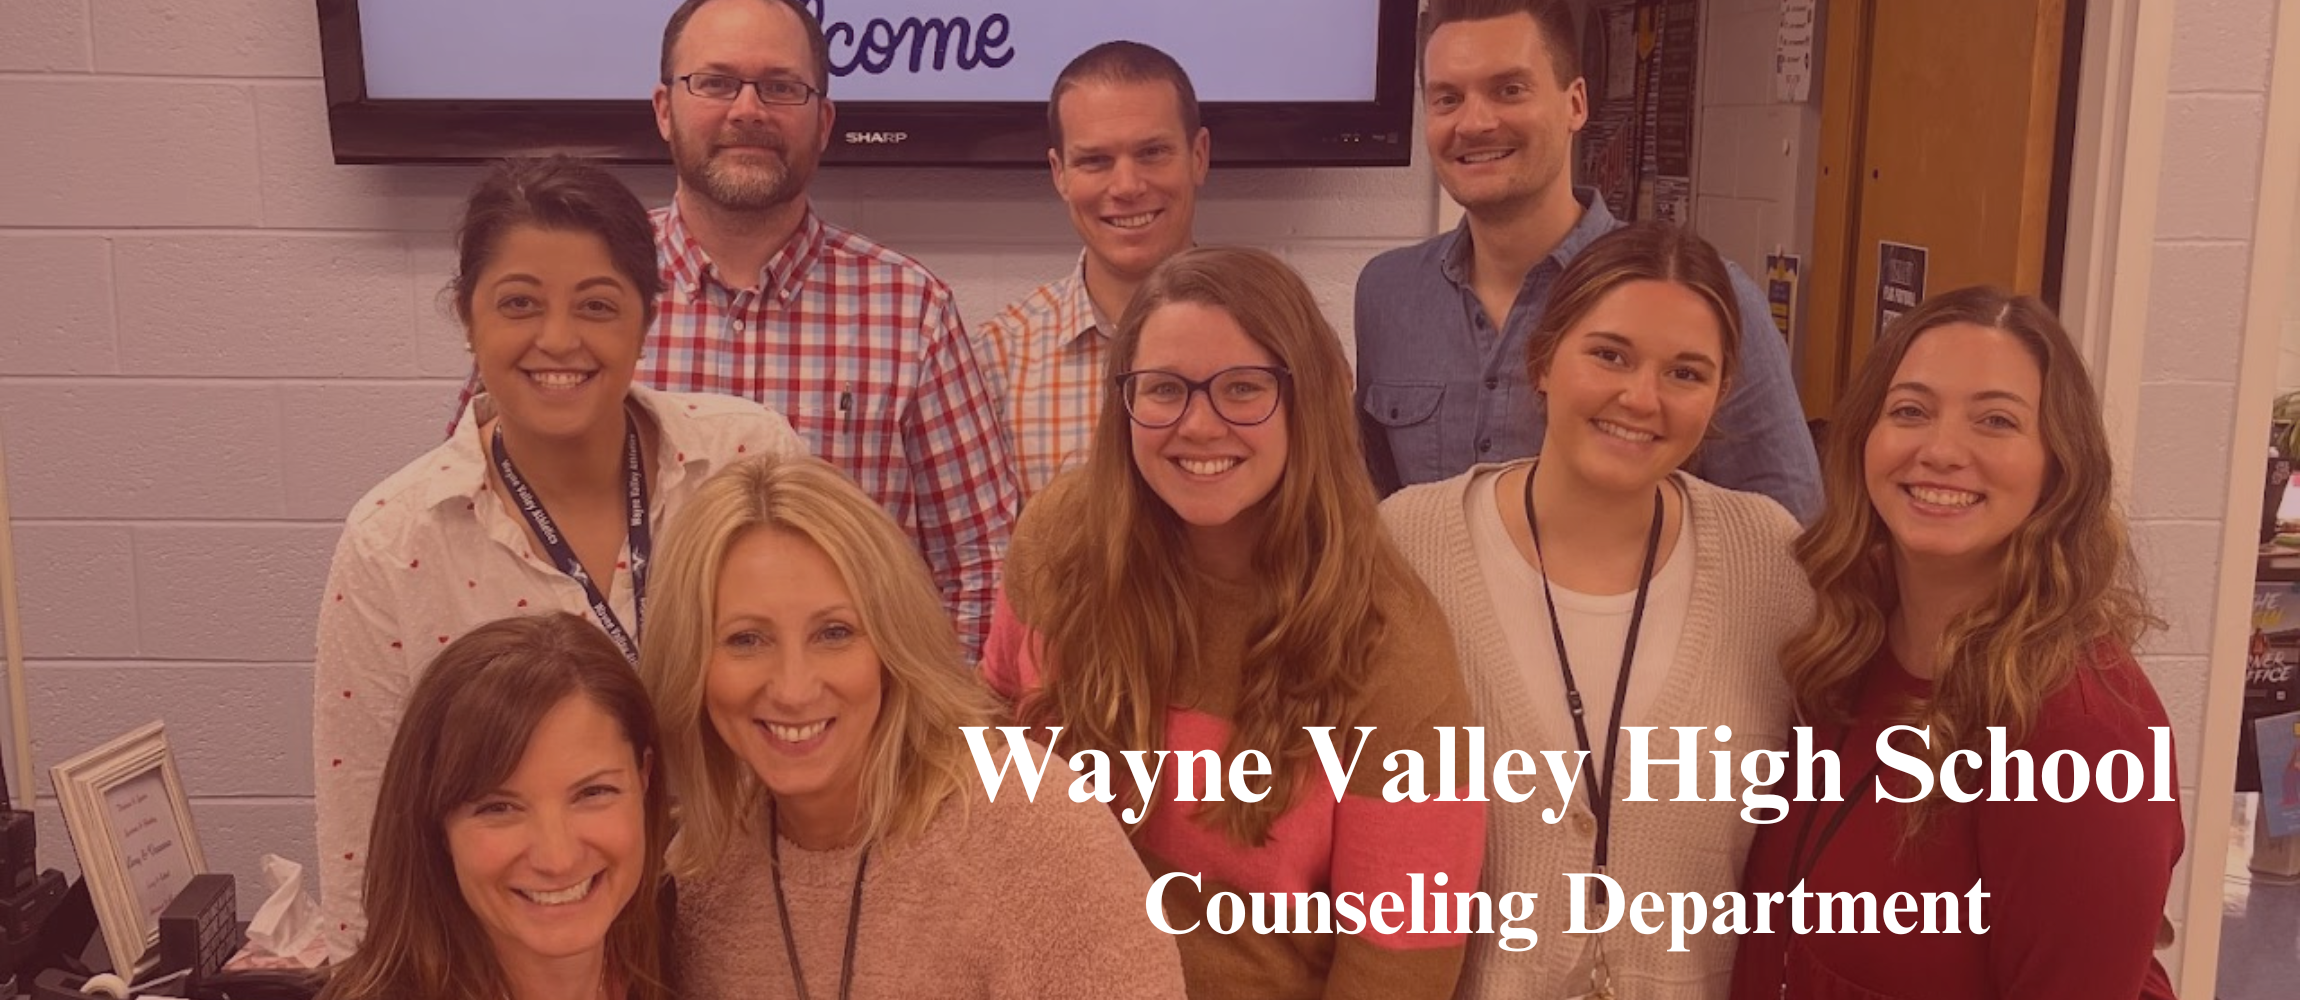 WVHS Counseling Department Staff